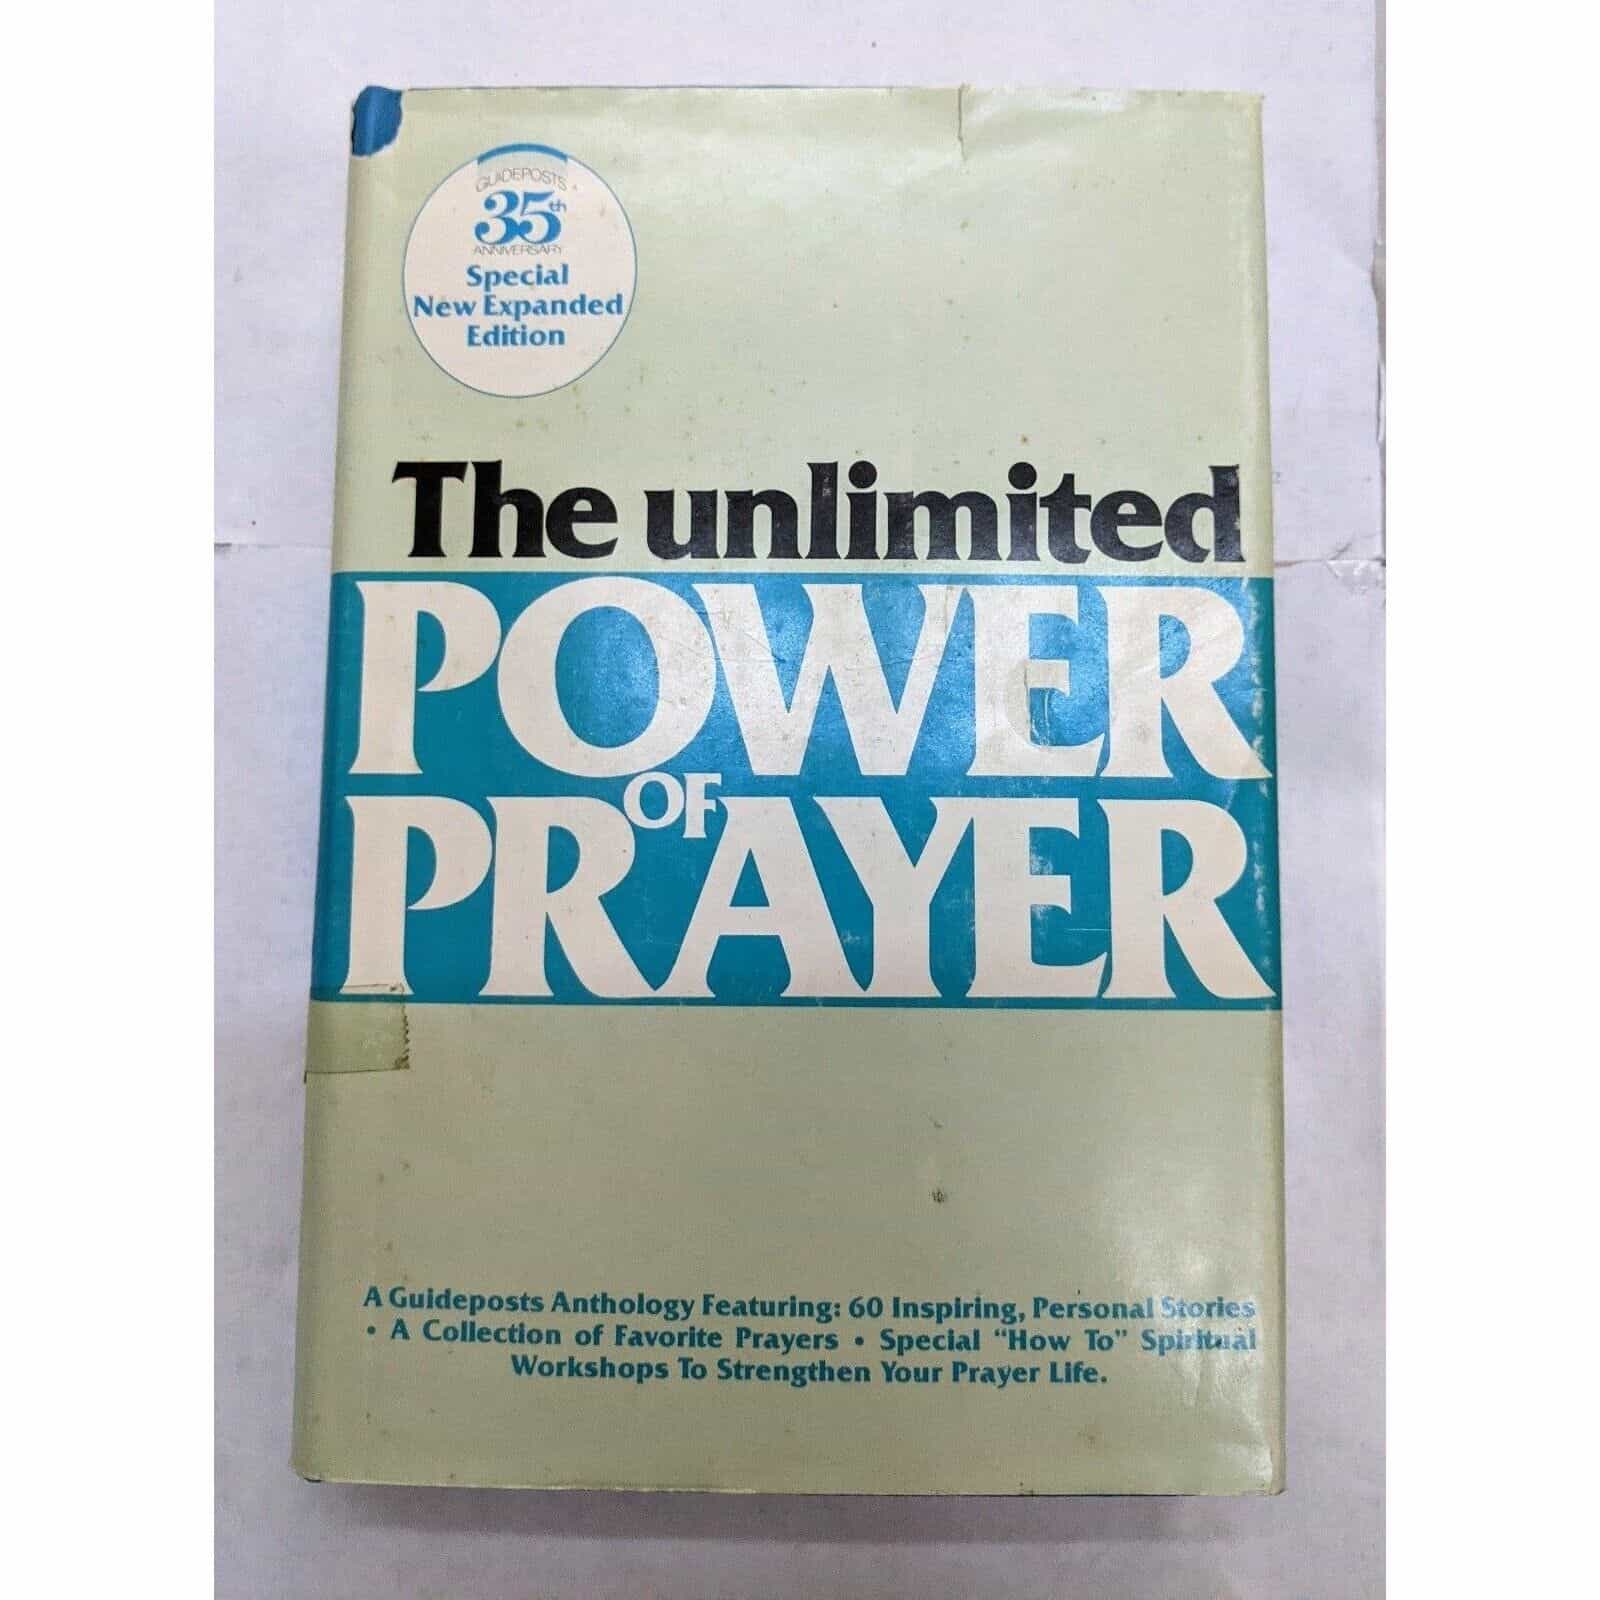 The Unlimited Power Of Prayer by Guideposts